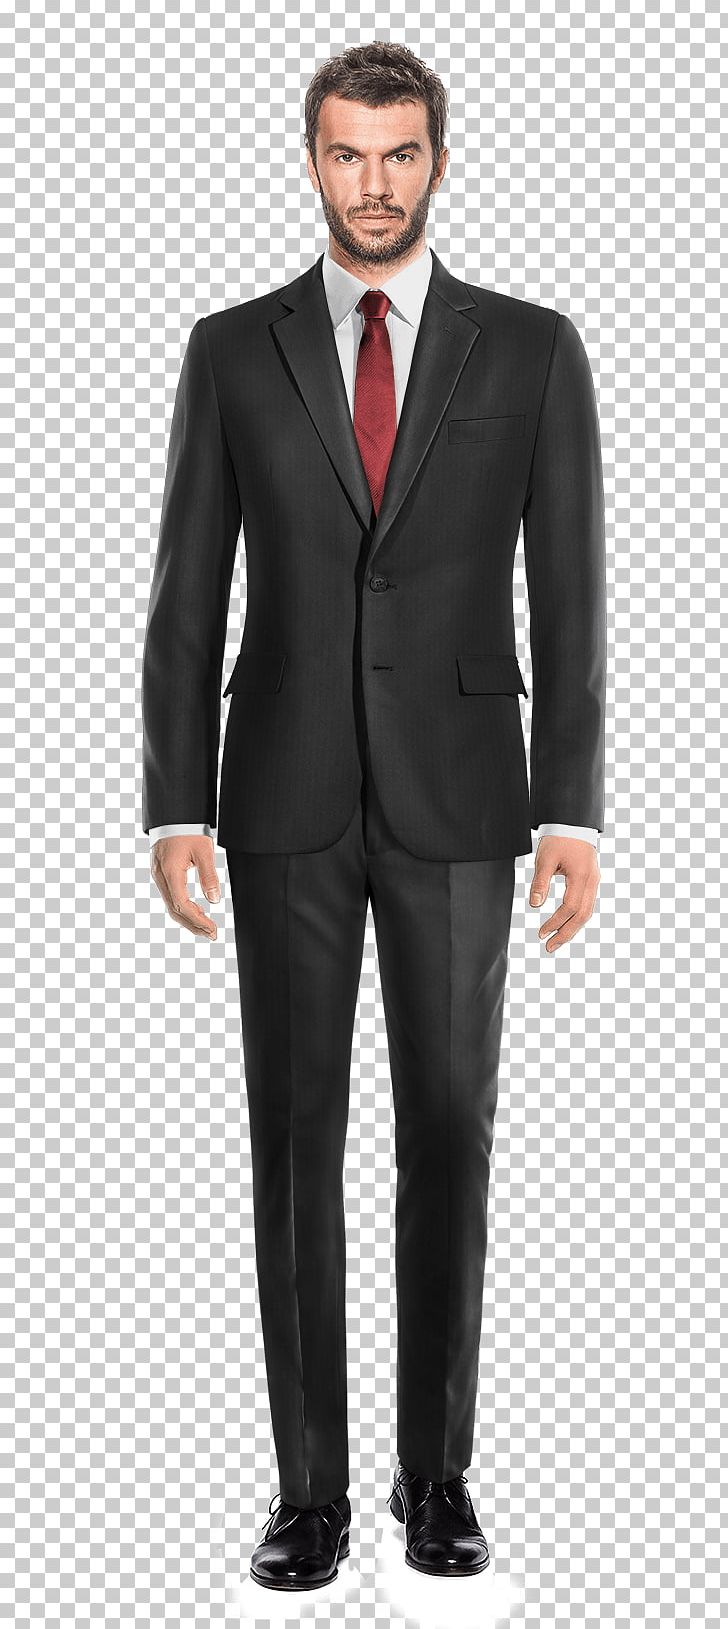 Suit Tailor JoS. A. Bank Clothiers Sport Coat Shirt PNG, Clipart, Bespoke Tailoring, Blazer, Business, Businessperson, Clothing Free PNG Download